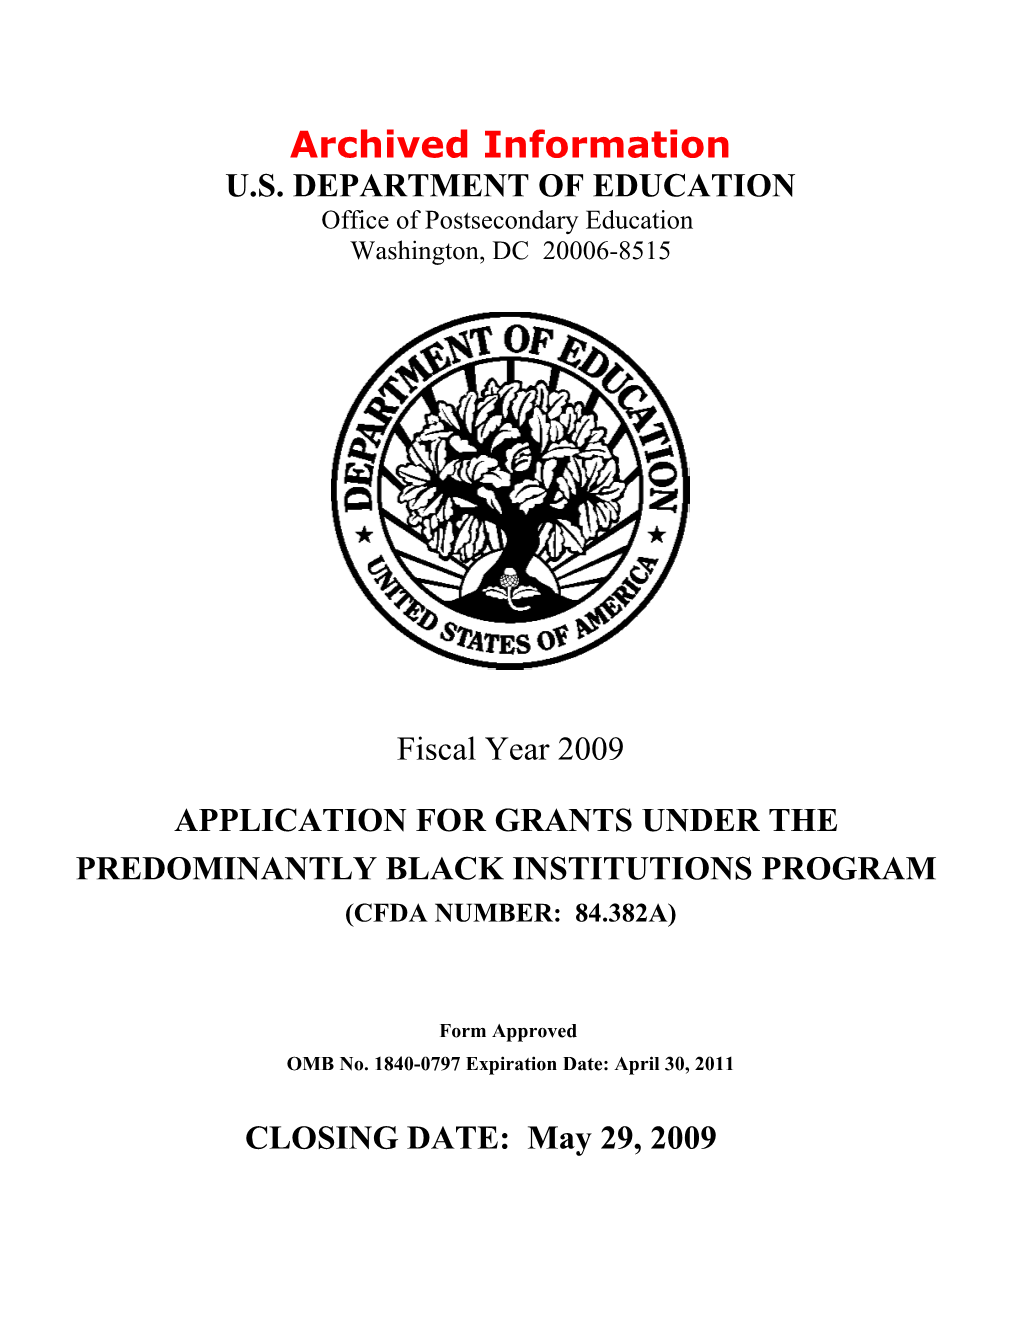 Archived: FY 2009 Application for the Predominantly Black Institutions Program - CCRAA (MS Word)